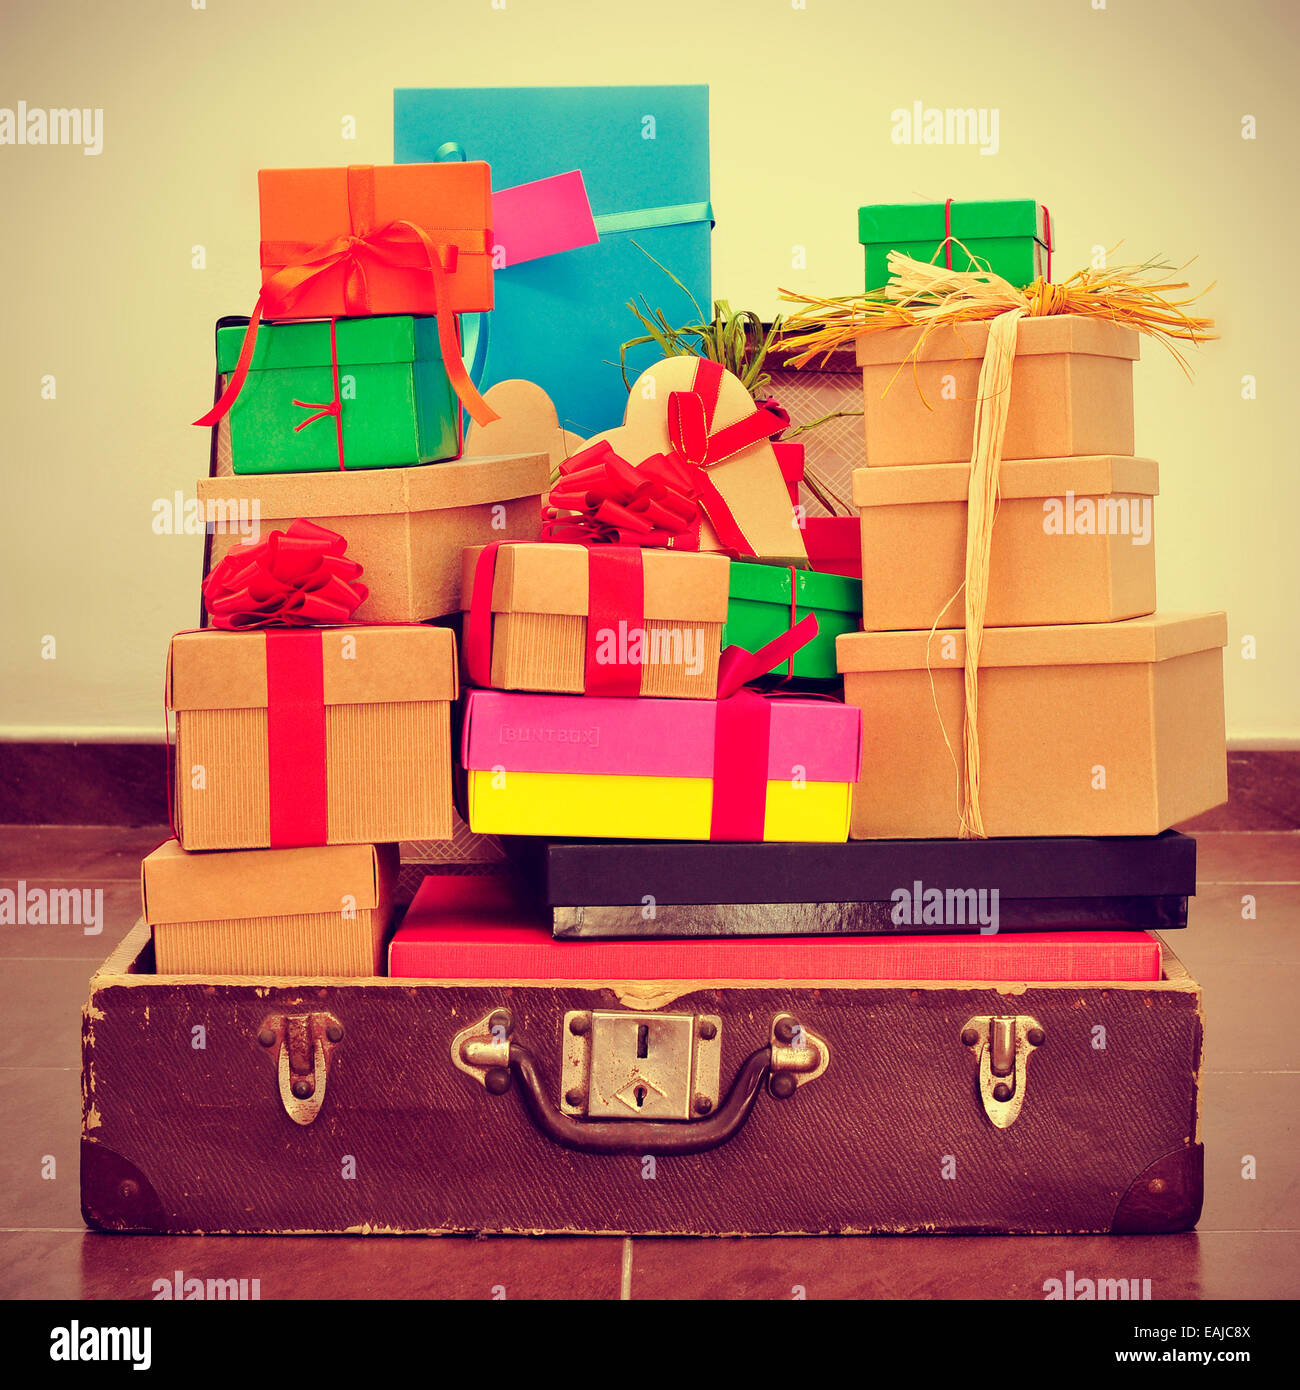 a pile of gifts of different colors and sizes in an old suitcase, with a retro effect Stock Photo